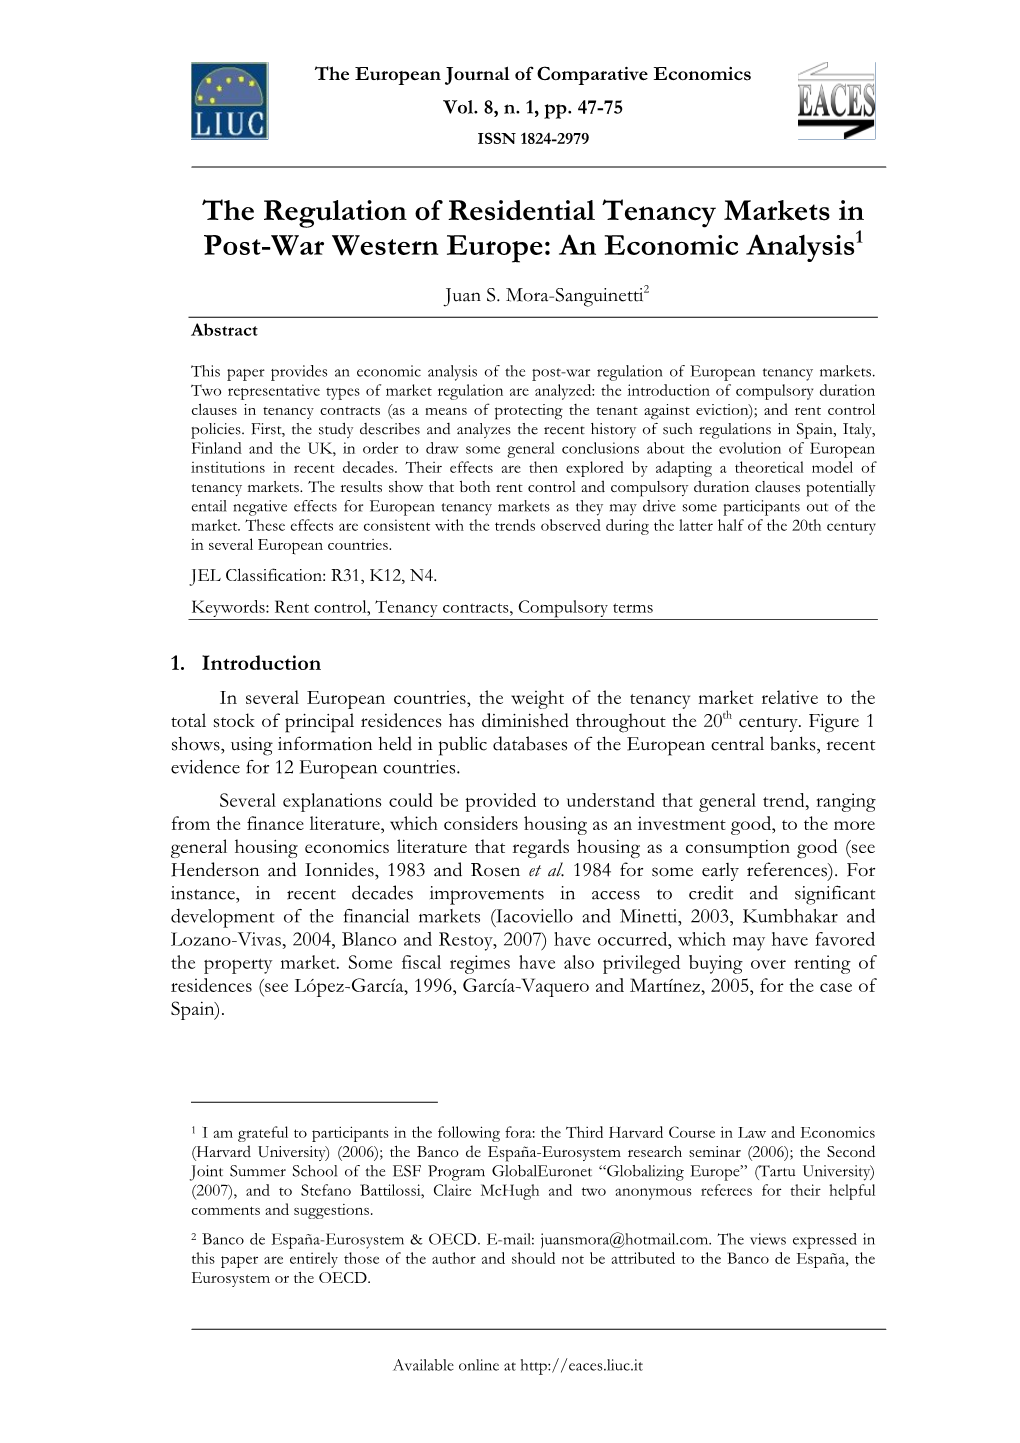 The Regulation of Residential Tenancy Markets in Post-War Western Europe: an Economic Analysis1